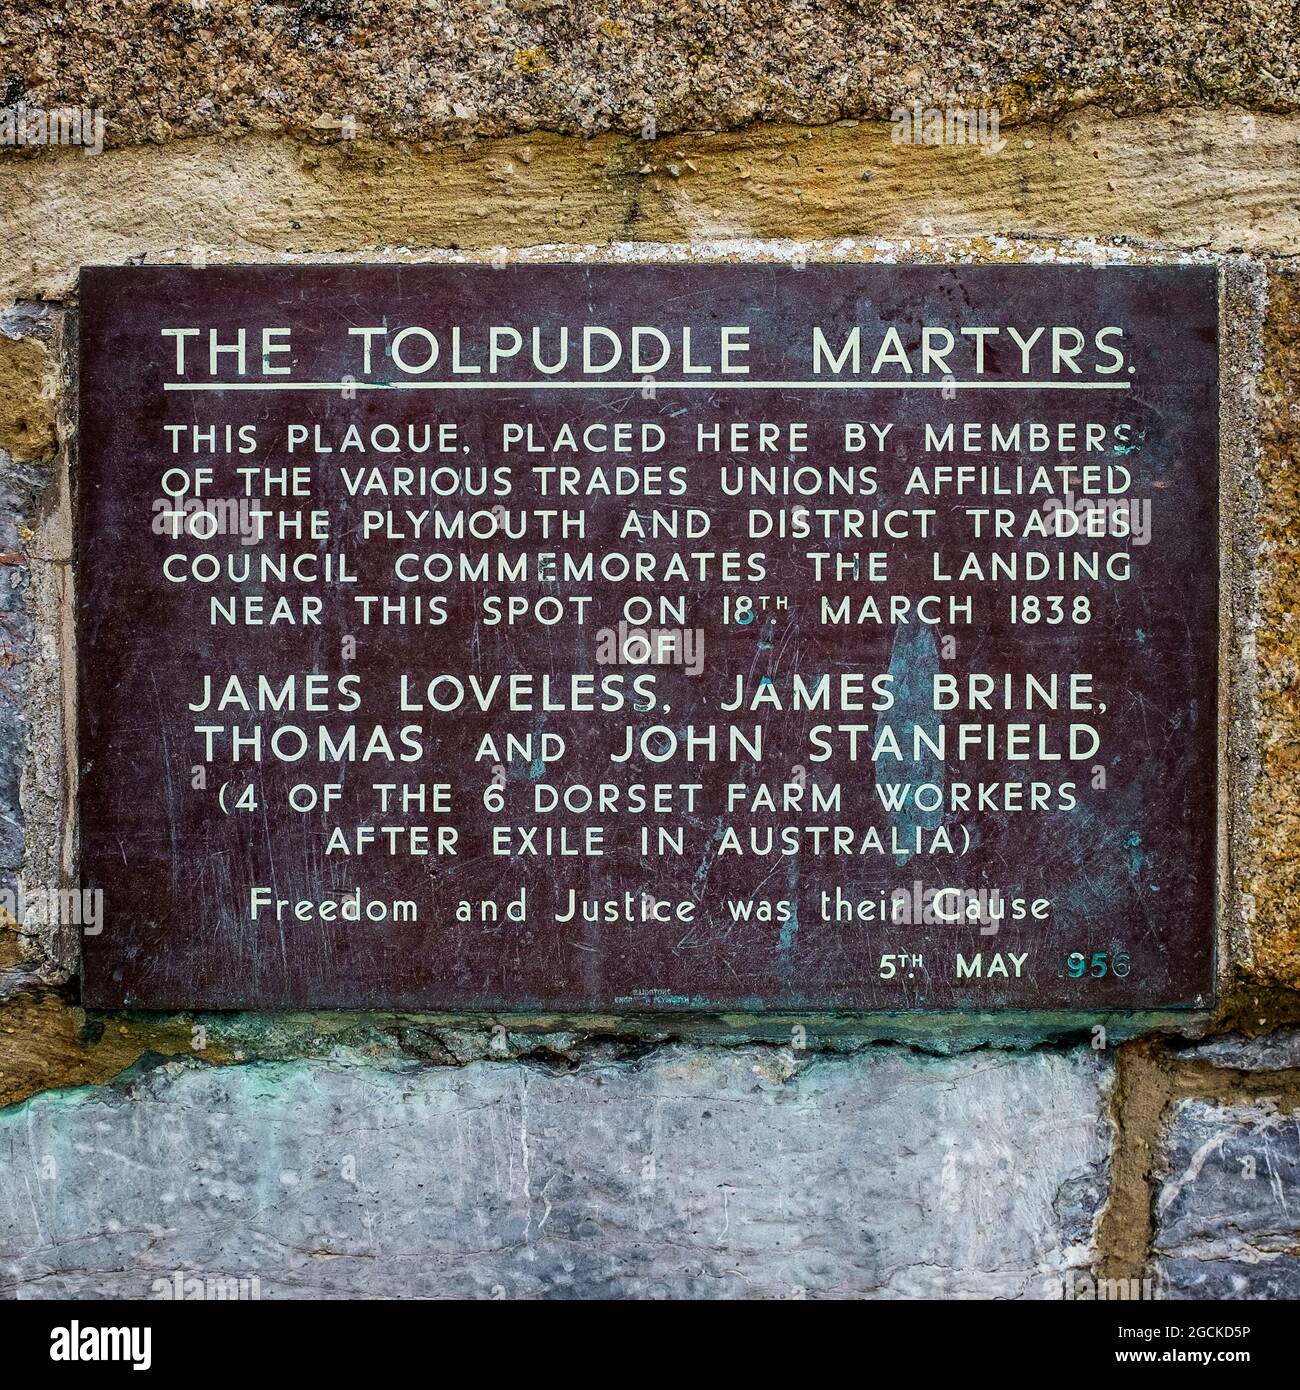 Plaque noting return from exile in Australia of 4 Dorset farm workers - Tolpuddle Martyrs Stock Photo